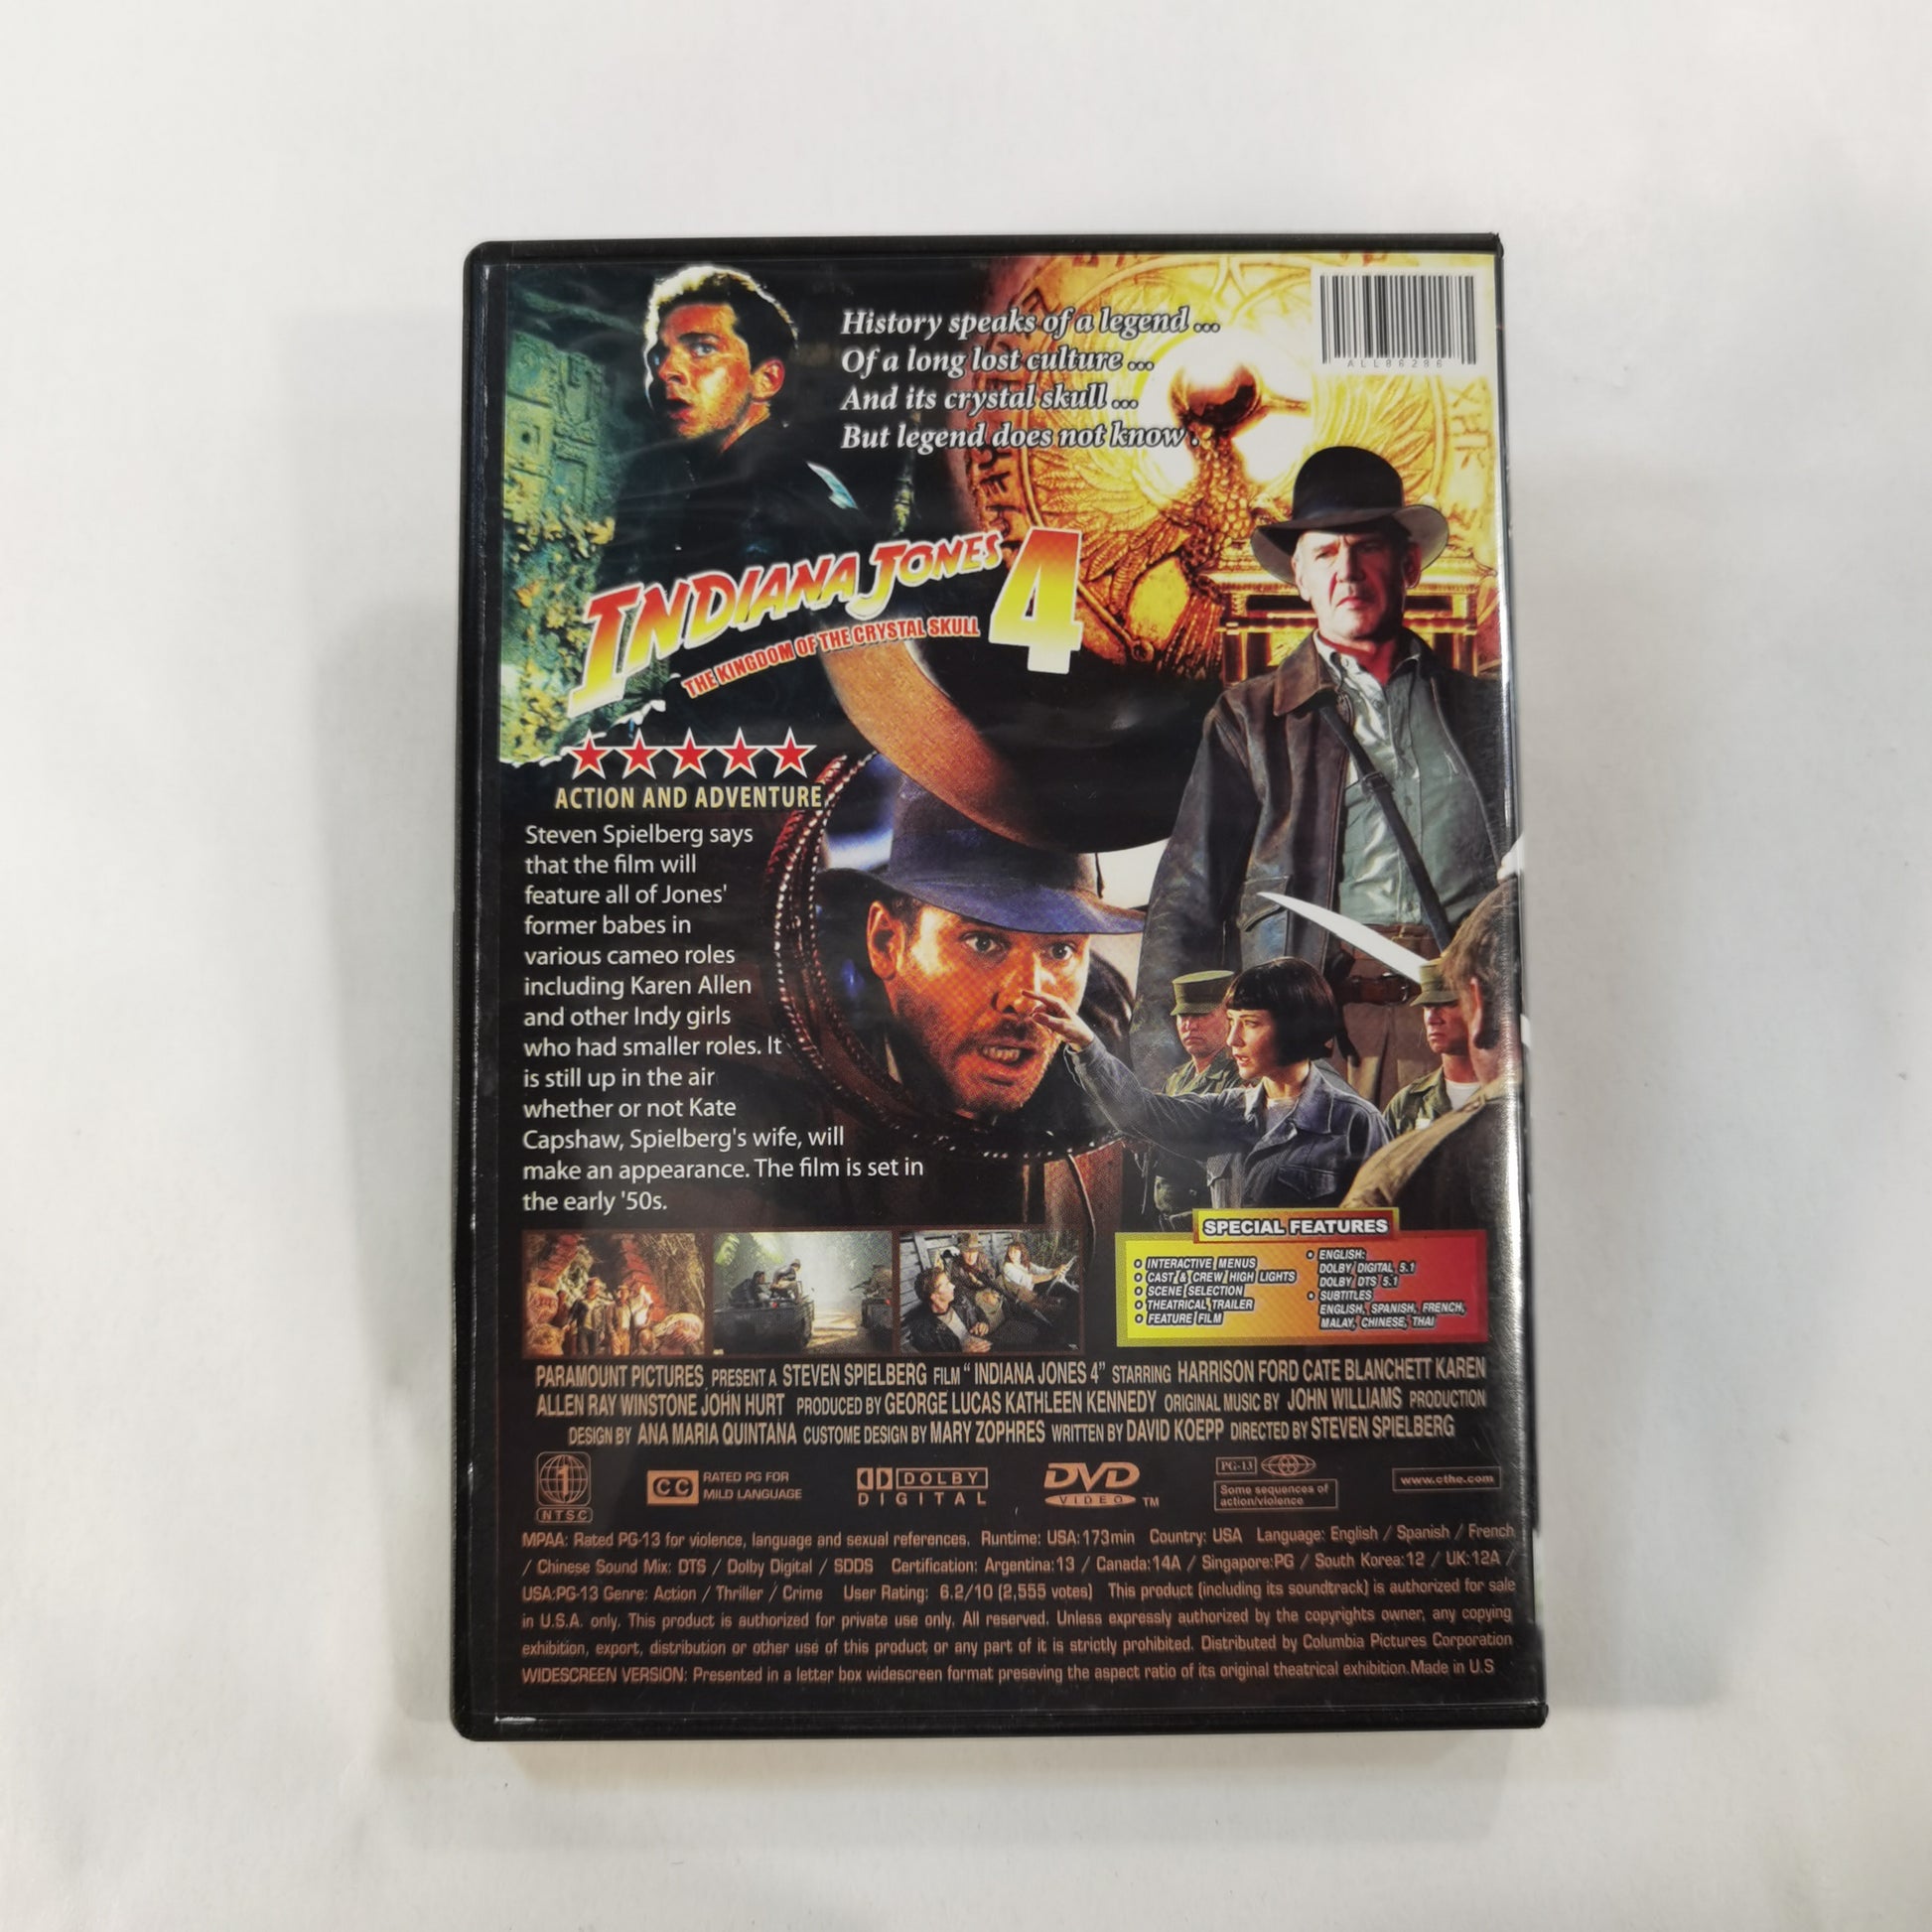 Indiana Jones and the Kingdom of the Crystal Skull (2008) - DVD